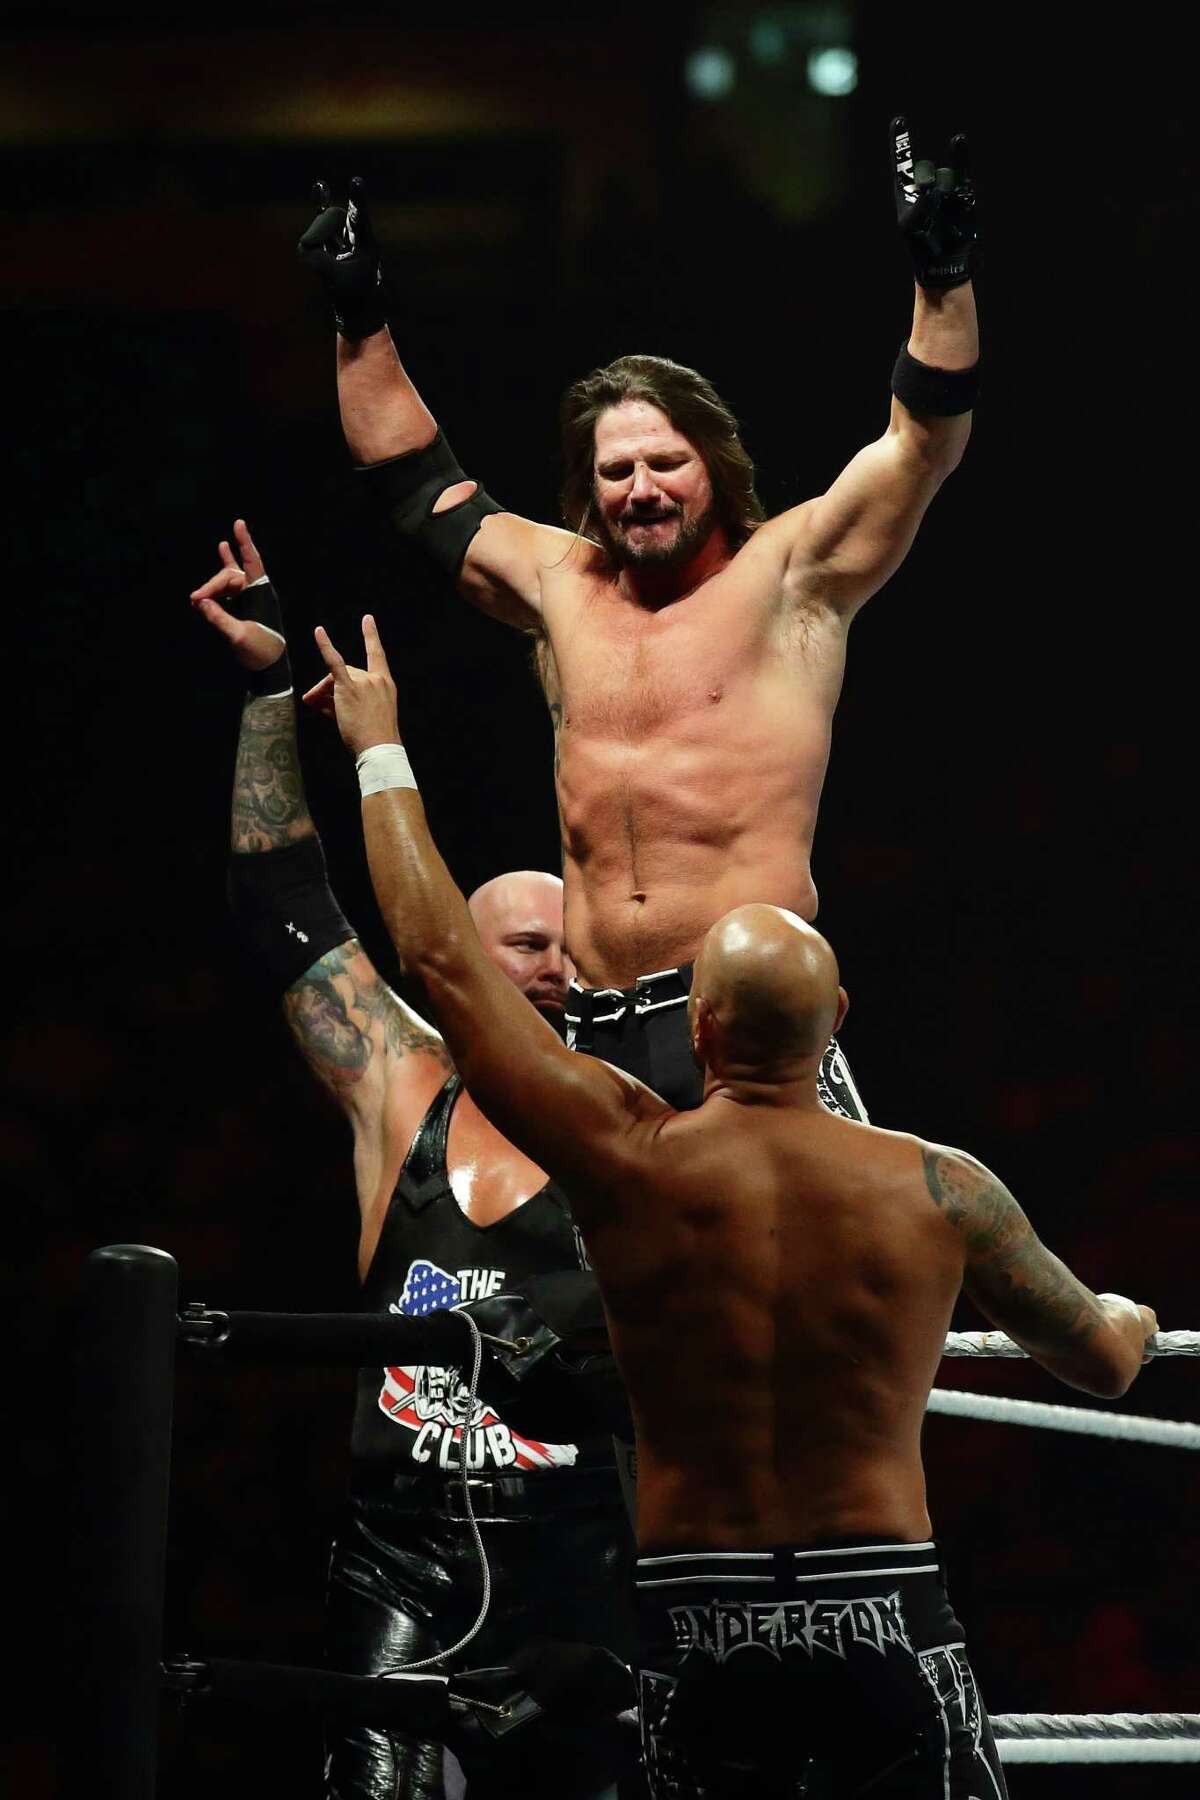 SINGAPORE - JUNE 27: (L-R) Luke Gallows, AJ Styles and Karl Anderson during the WWE Live Singapore at the Singapore Indoor Stadium on June 27, 2019 in Singapore. (Photo by Suhaimi Abdullah/Getty Images for Singapore Sports Hub)